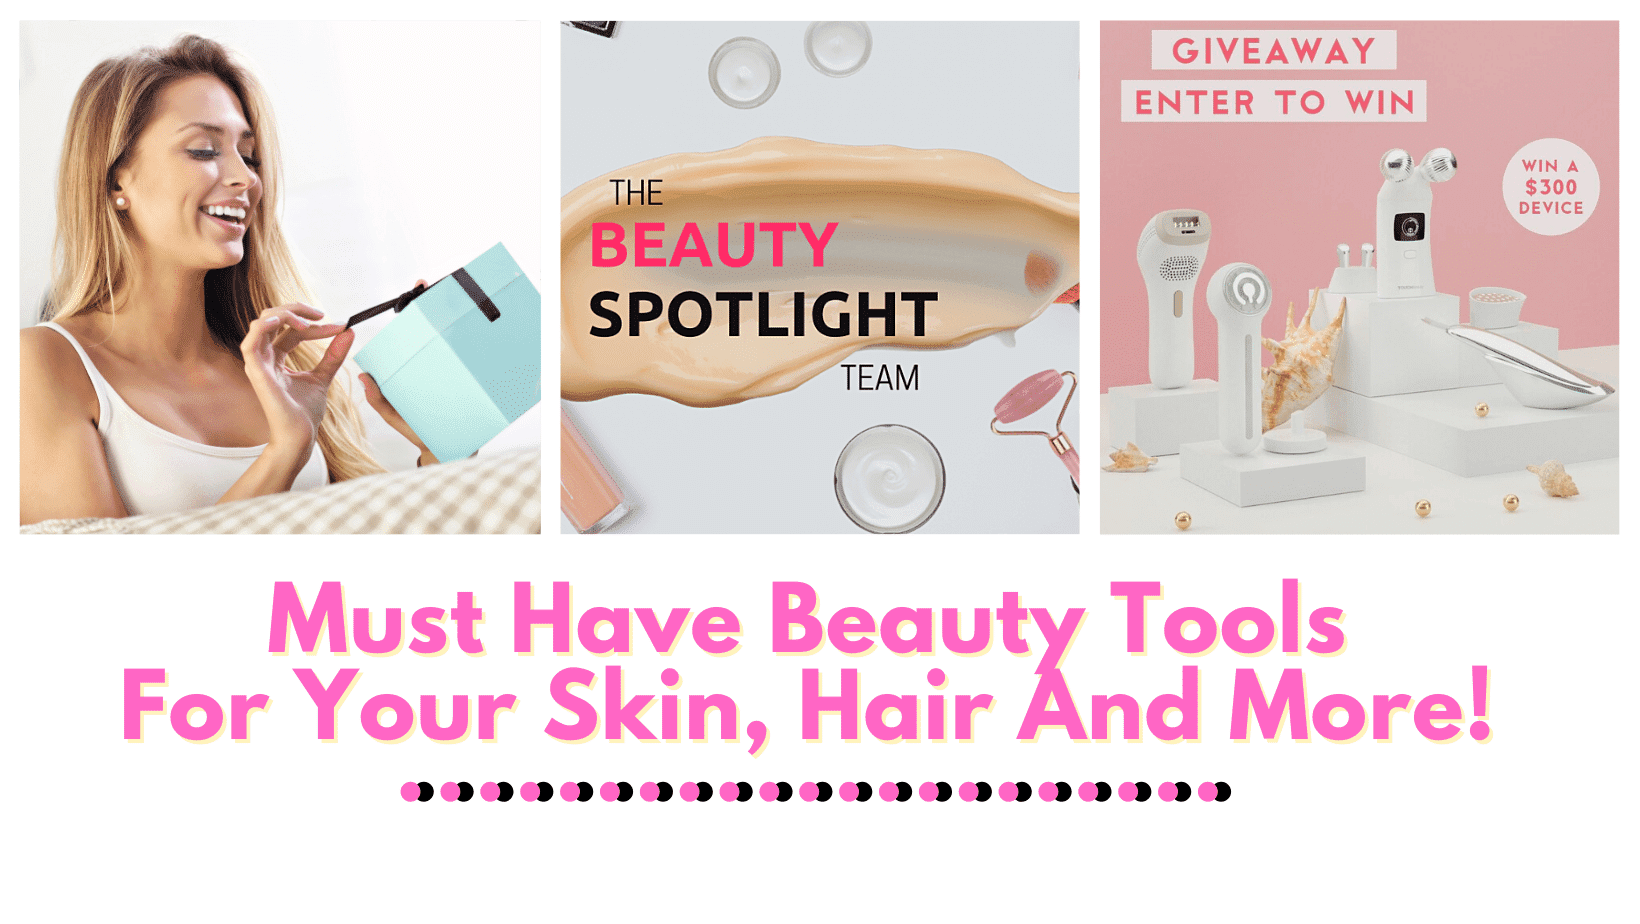 Must Have Beauty Tools For Your Skin, Hair And More!